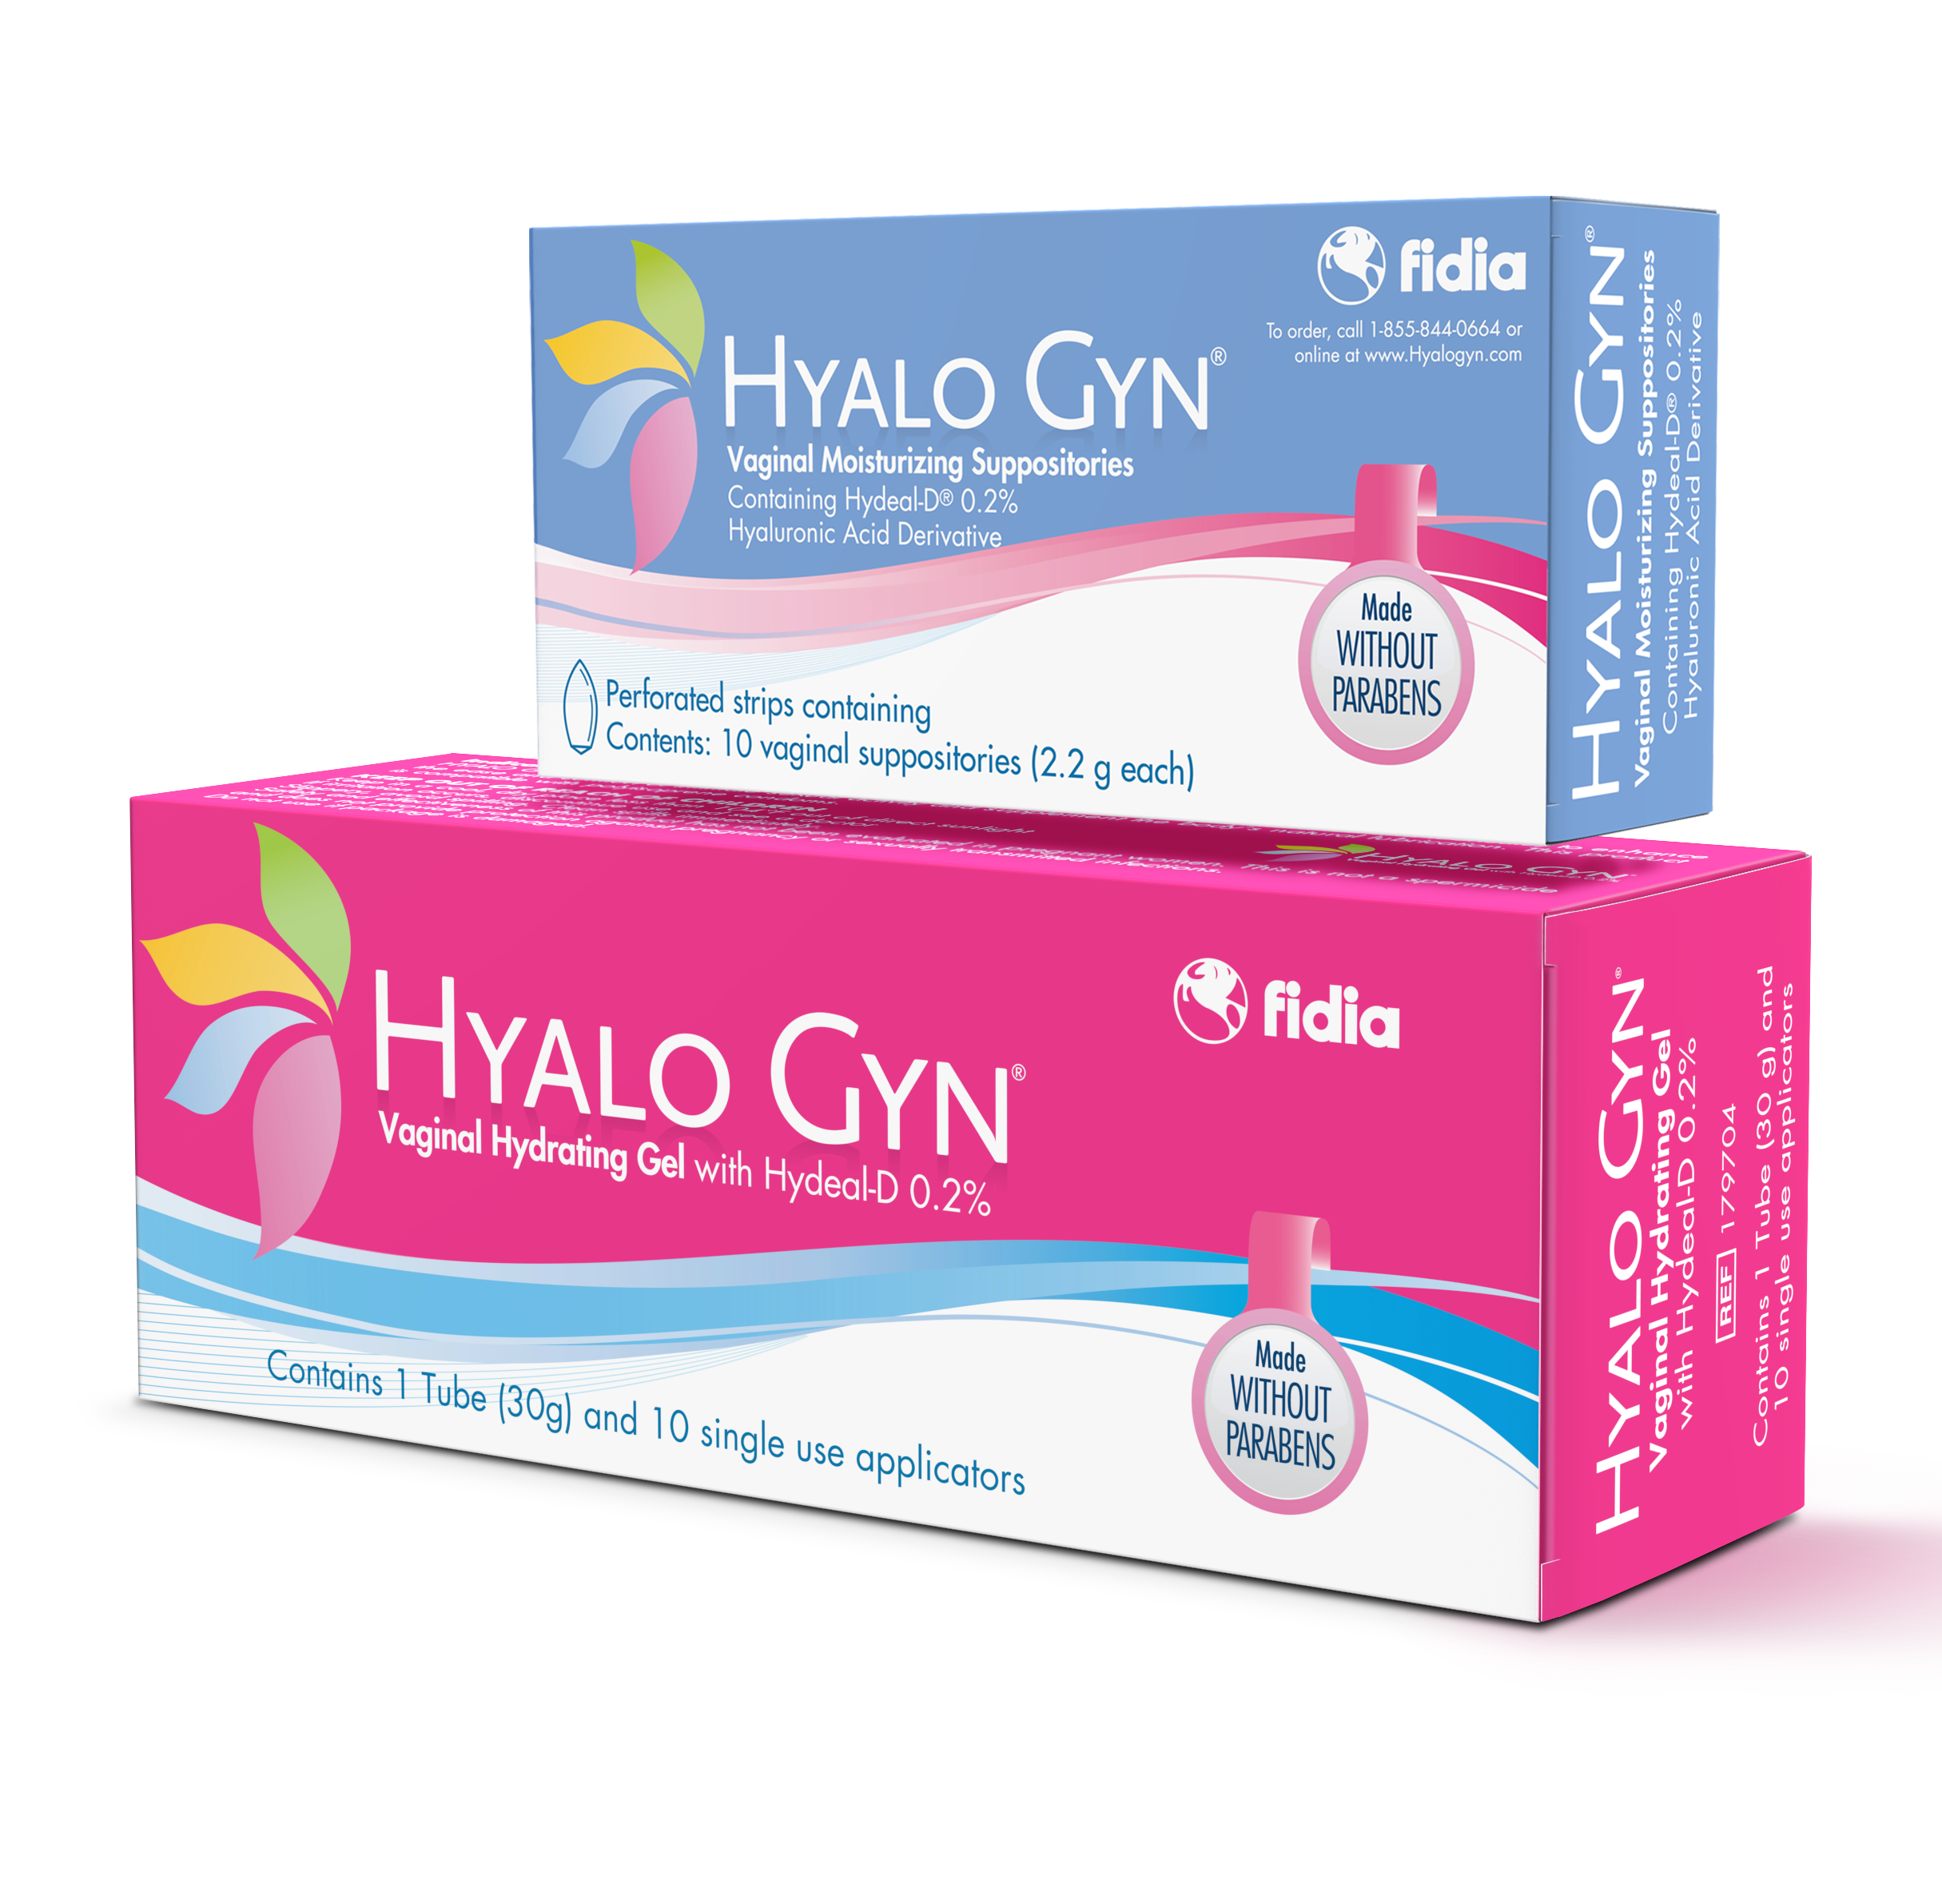 Hyalo Gyn packaging and tube